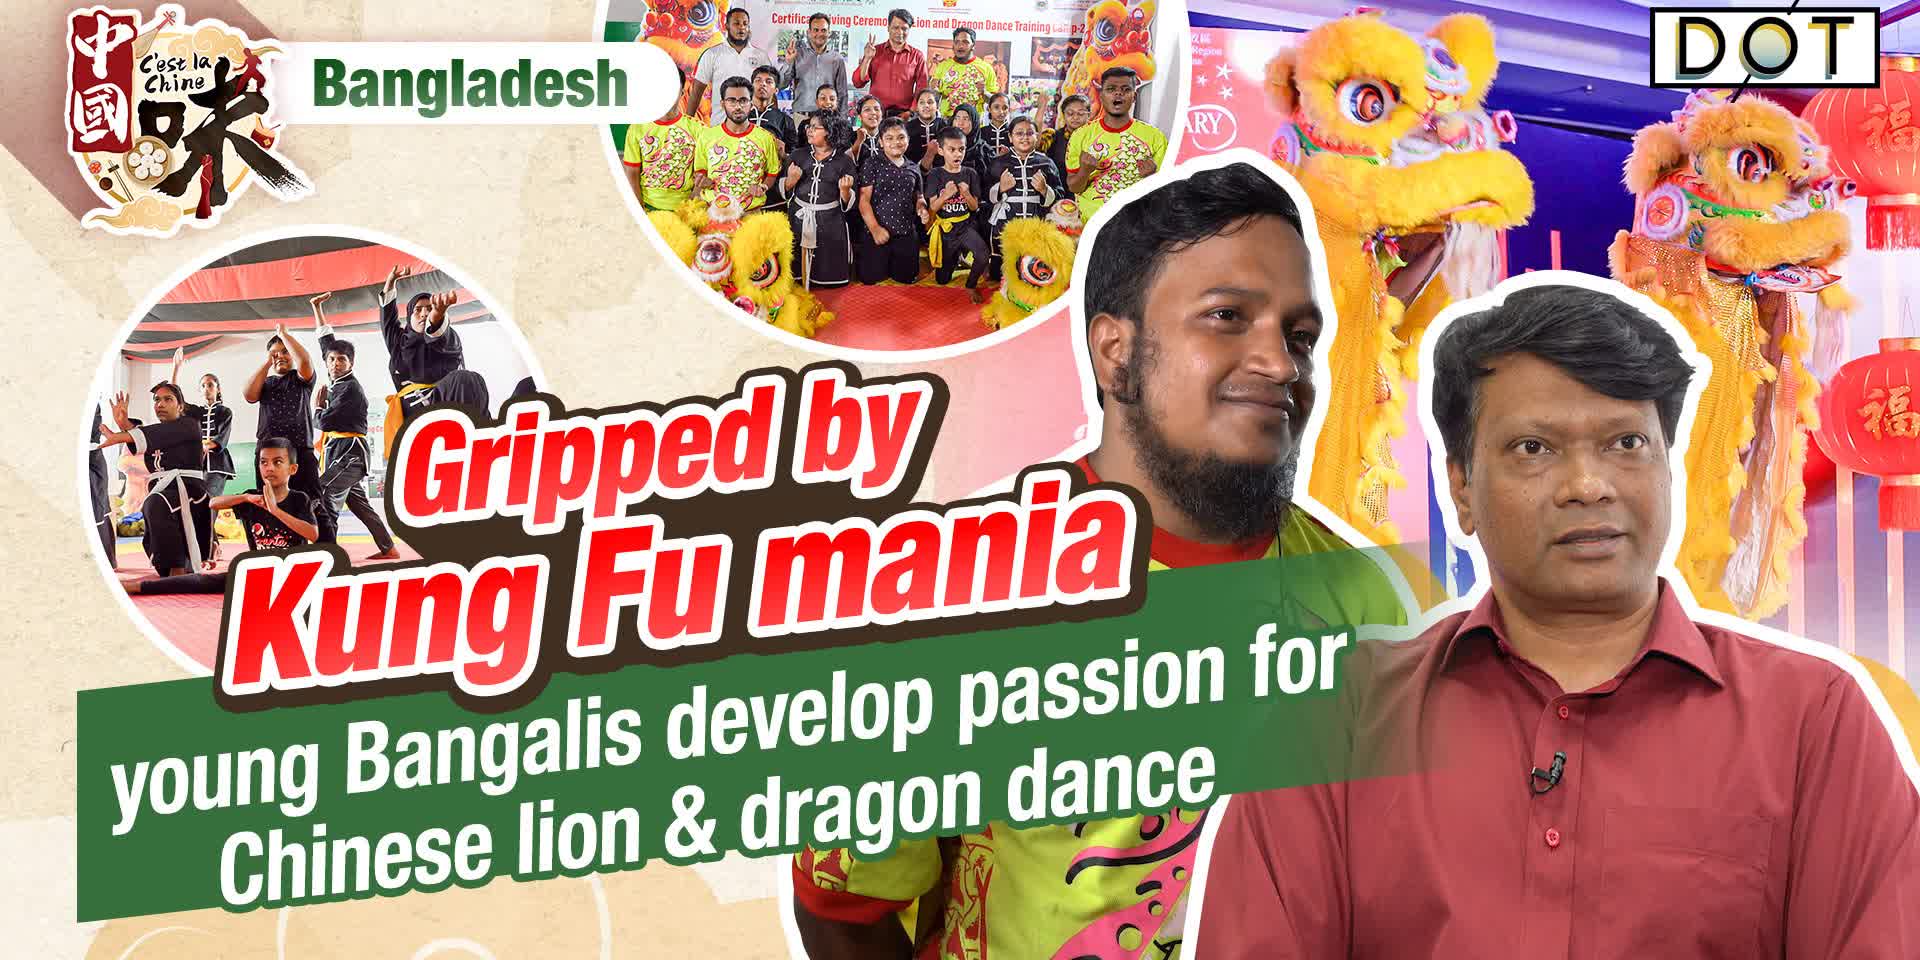 C'est la Chine · Bangladesh | Gripped by Kung Fu mania, young Bangalis develop passion for Chinese lion & dragon dance